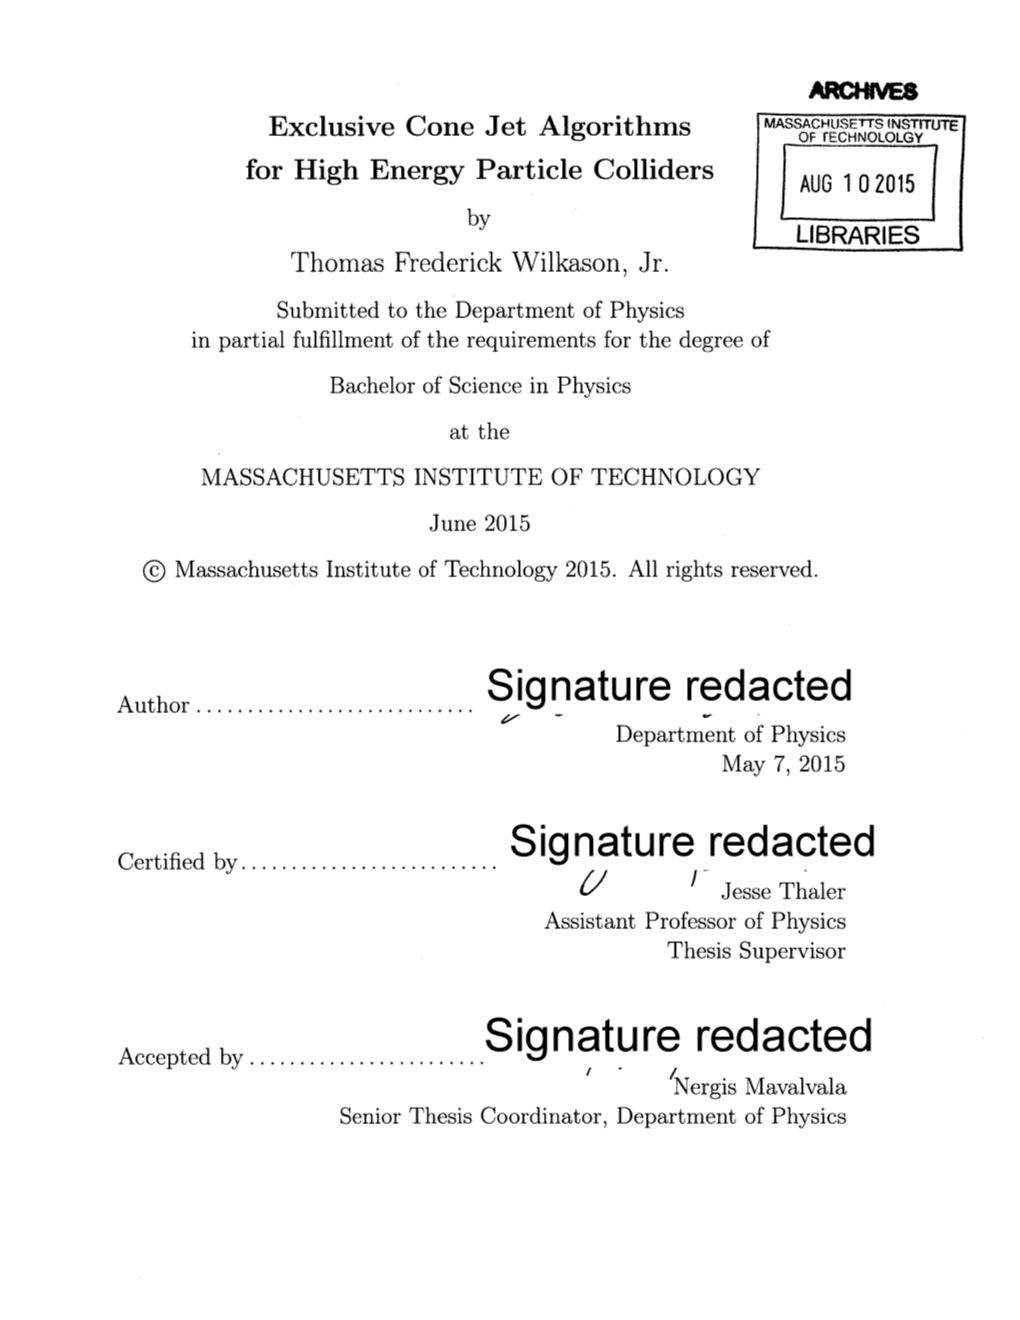 Signature Redacted Department of Physics May 7, 2015